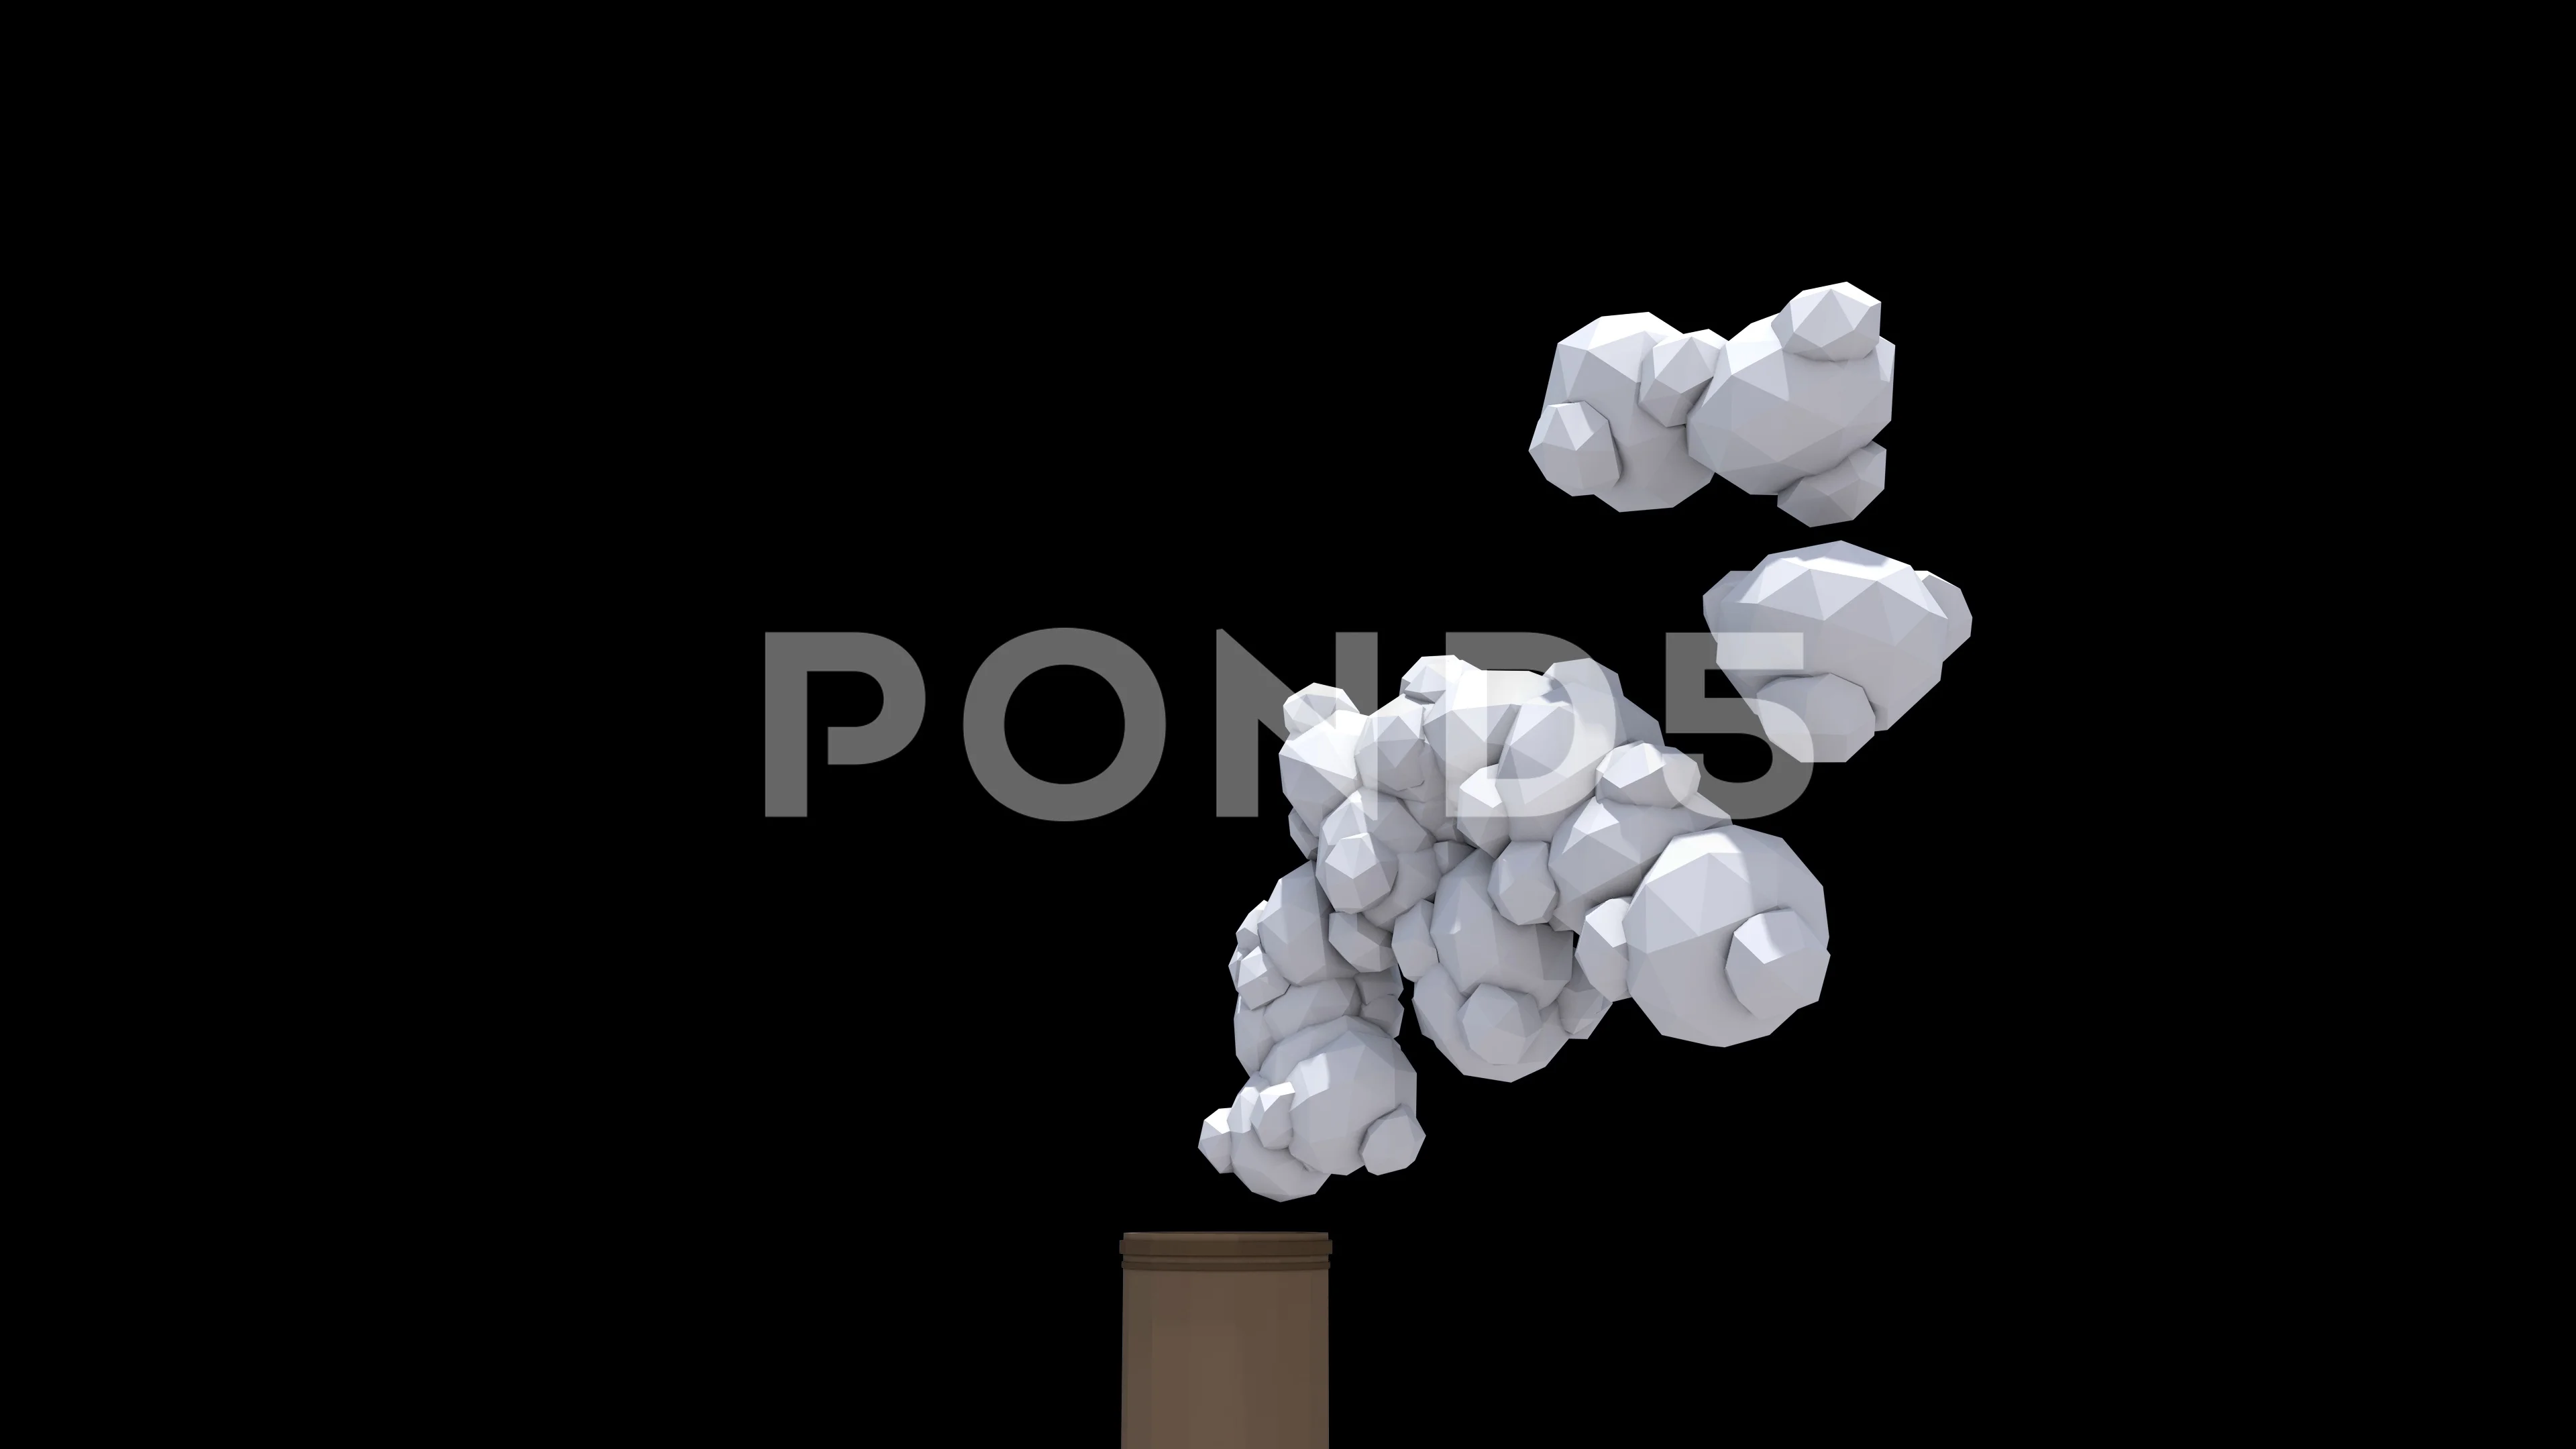 Low Poly smoke 3d animation. | Stock Video | Pond5